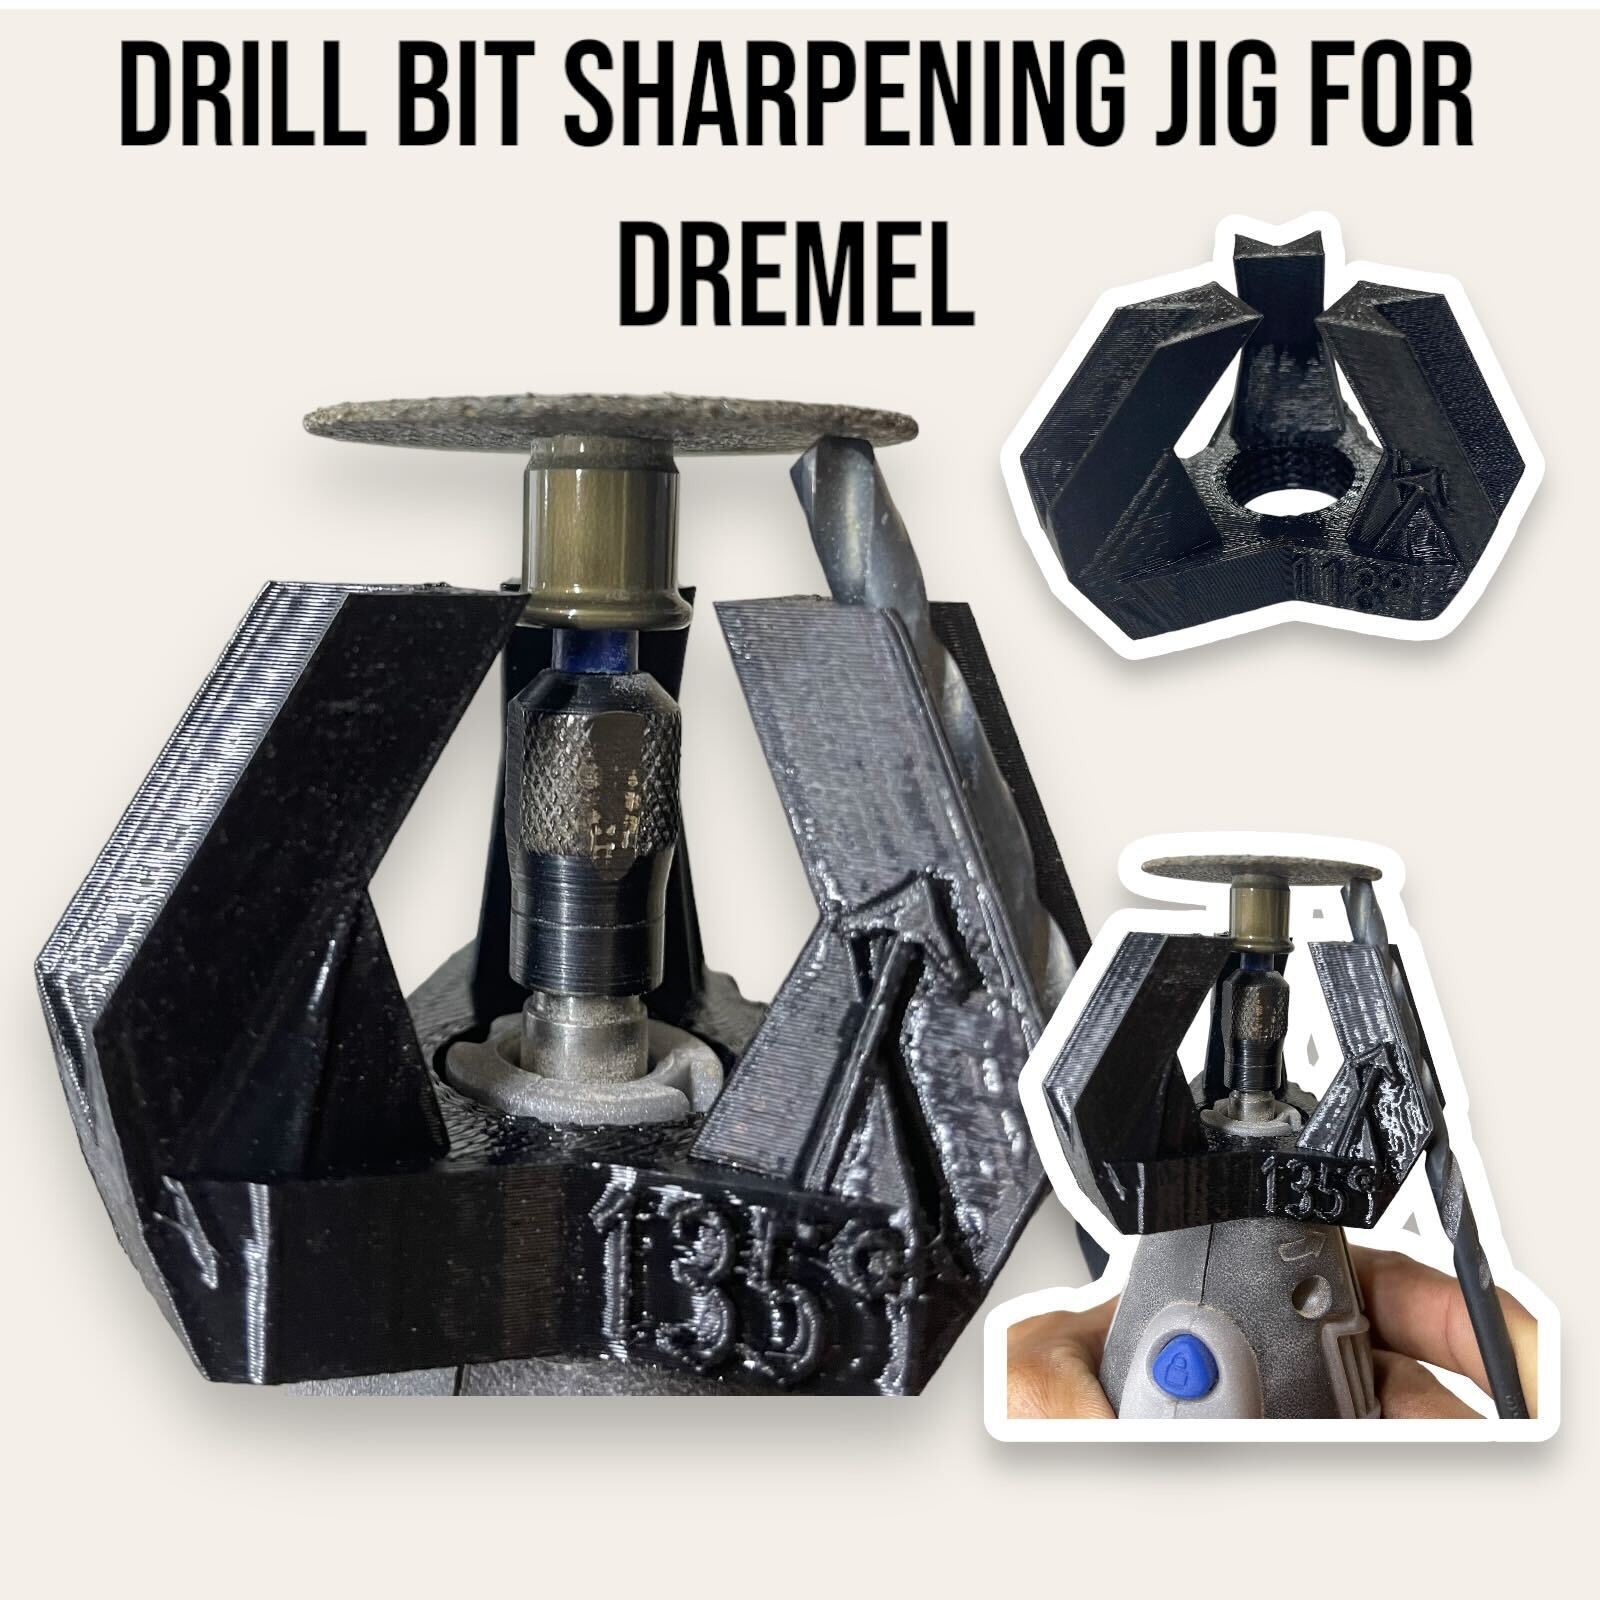 Dremel Drill Bit Sharpener Guide with 3 Angles (90°, 118° & 135°)